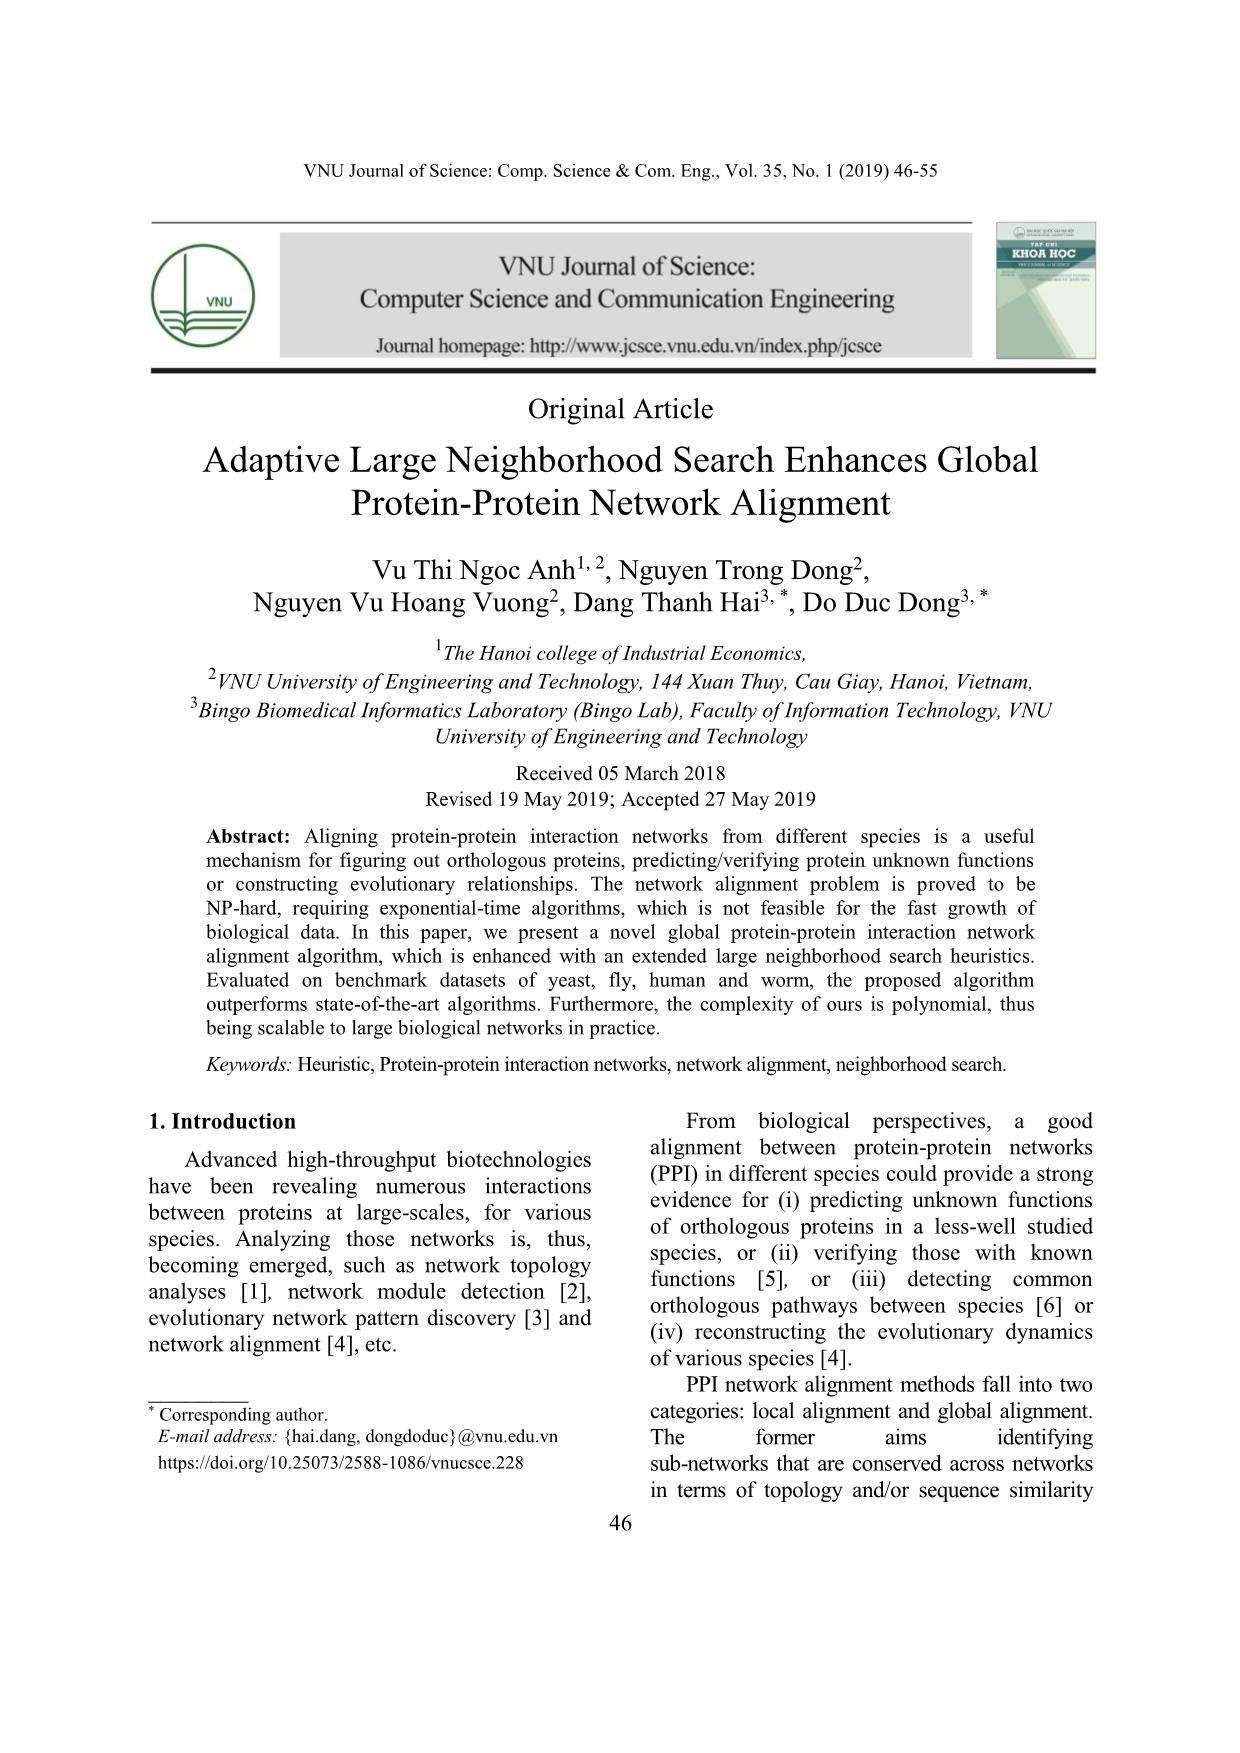 Adaptive Large Neighborhood Search Enhances Global Protein-Protein Network Alignment trang 1